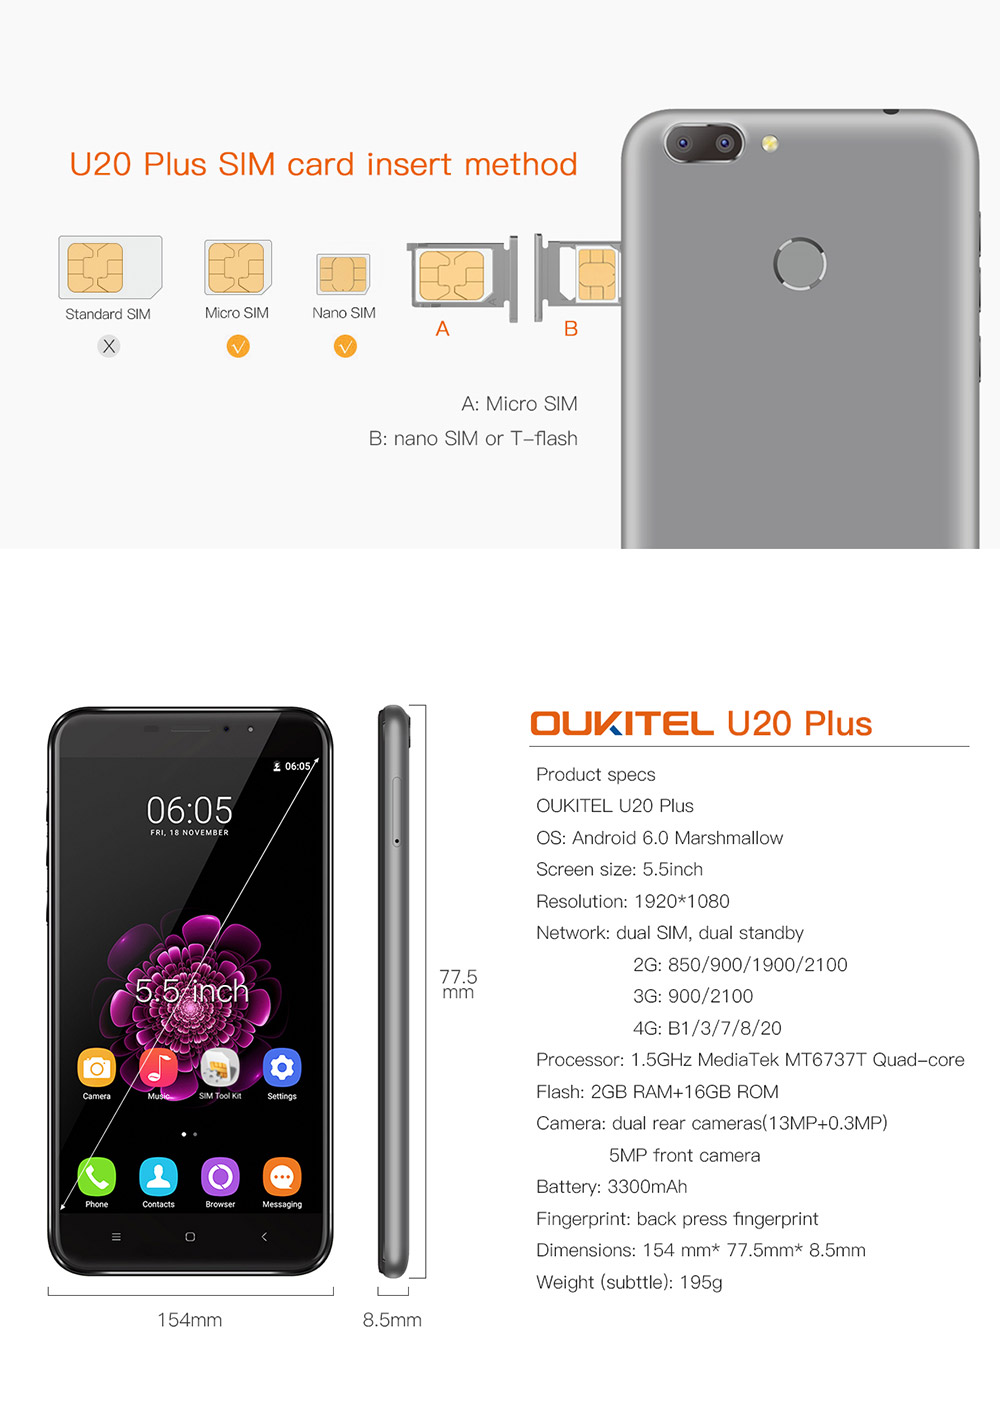 [HK Stock]Oukitel U20 Plus 5.5inch FHD Android 6.0 4G LTE Smartphone MT6737T Quad Core 1.5GHz 2GB RAM 16GB ROM Dual Rear Cameras 13.0MP+0.3MP TOUCH ID - GRAY